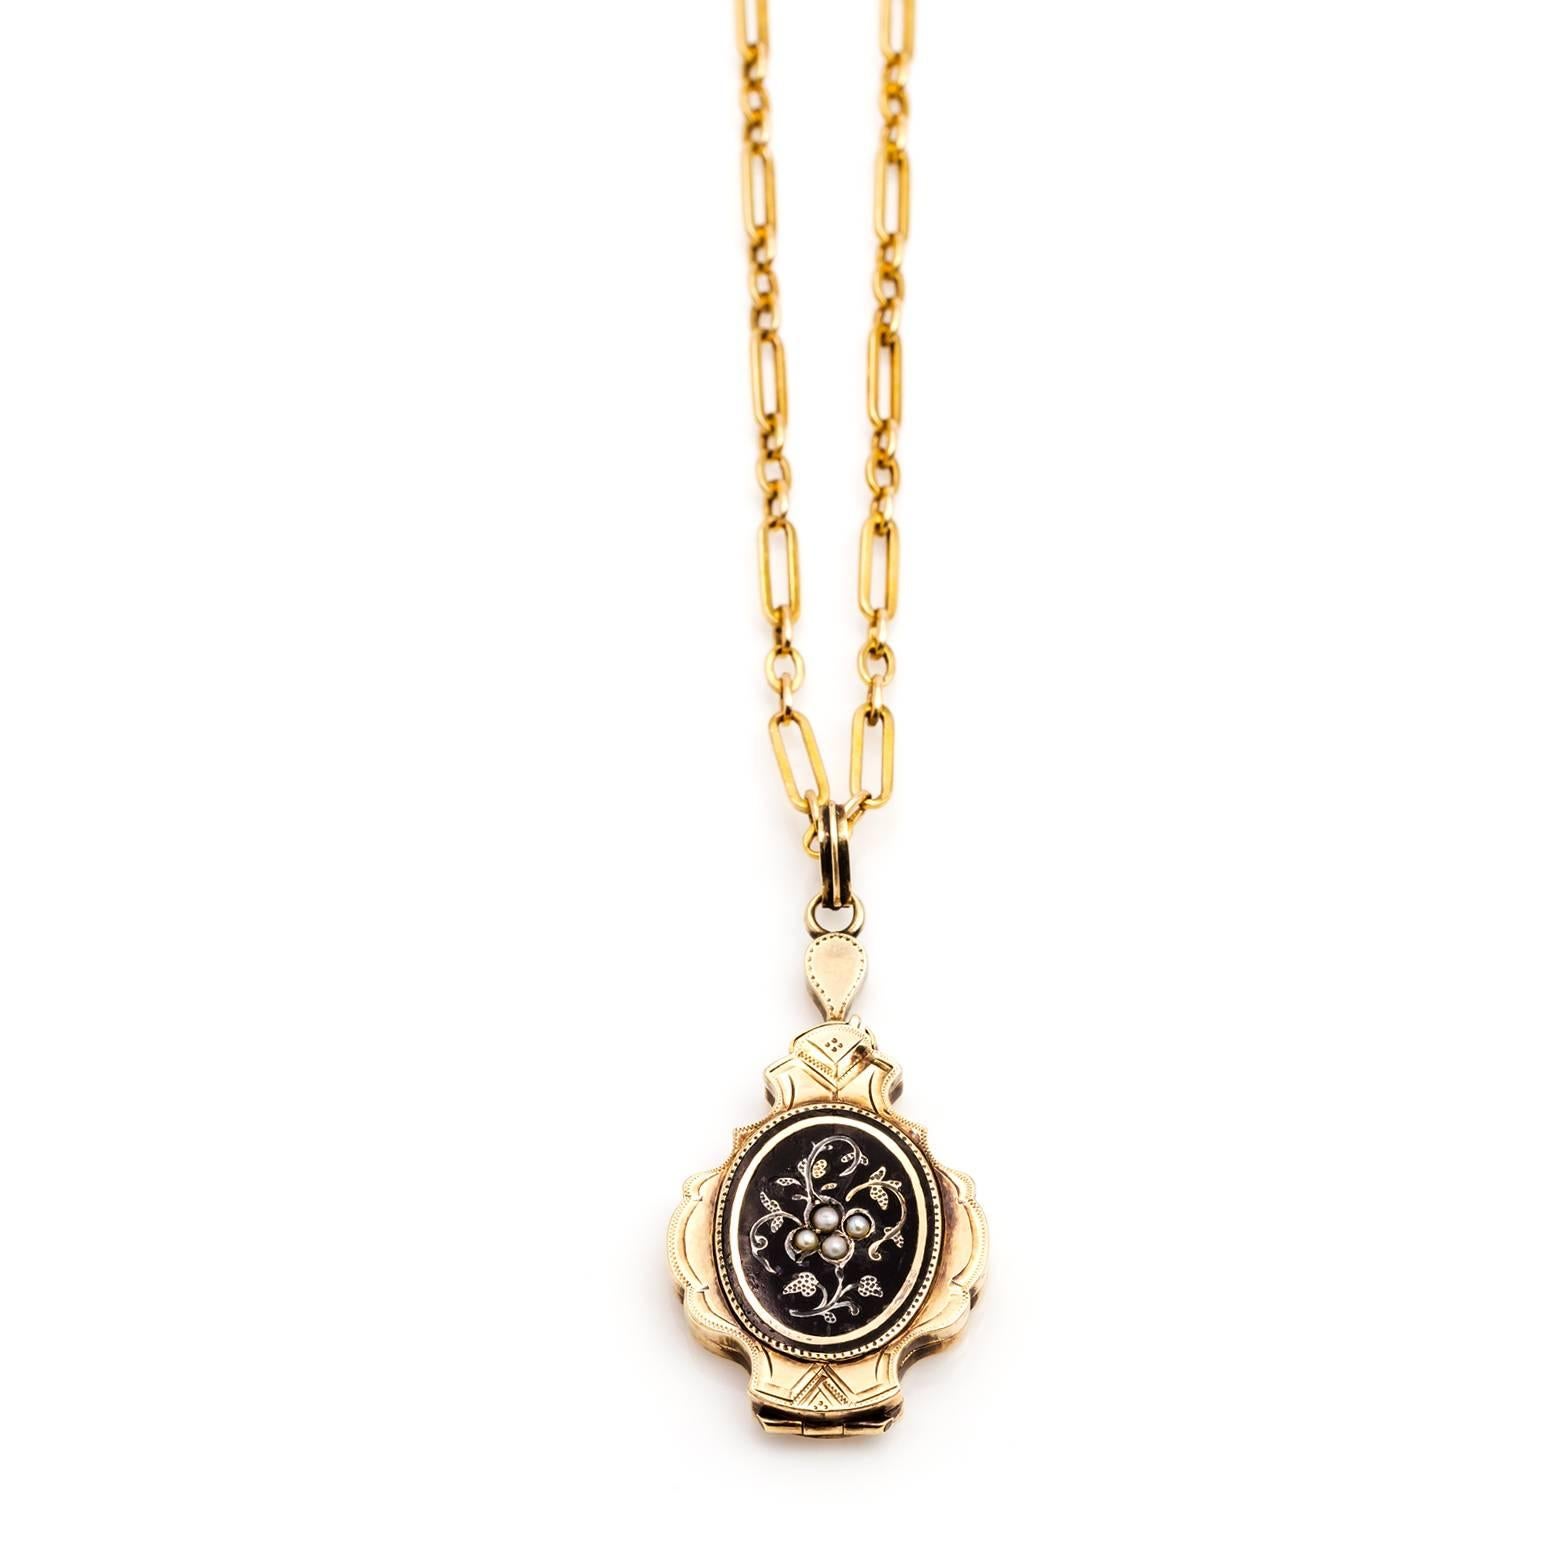 Antique Black Enamel, Pearl and Gold Locket in a Floral Design In Excellent Condition For Sale In Berkeley, CA